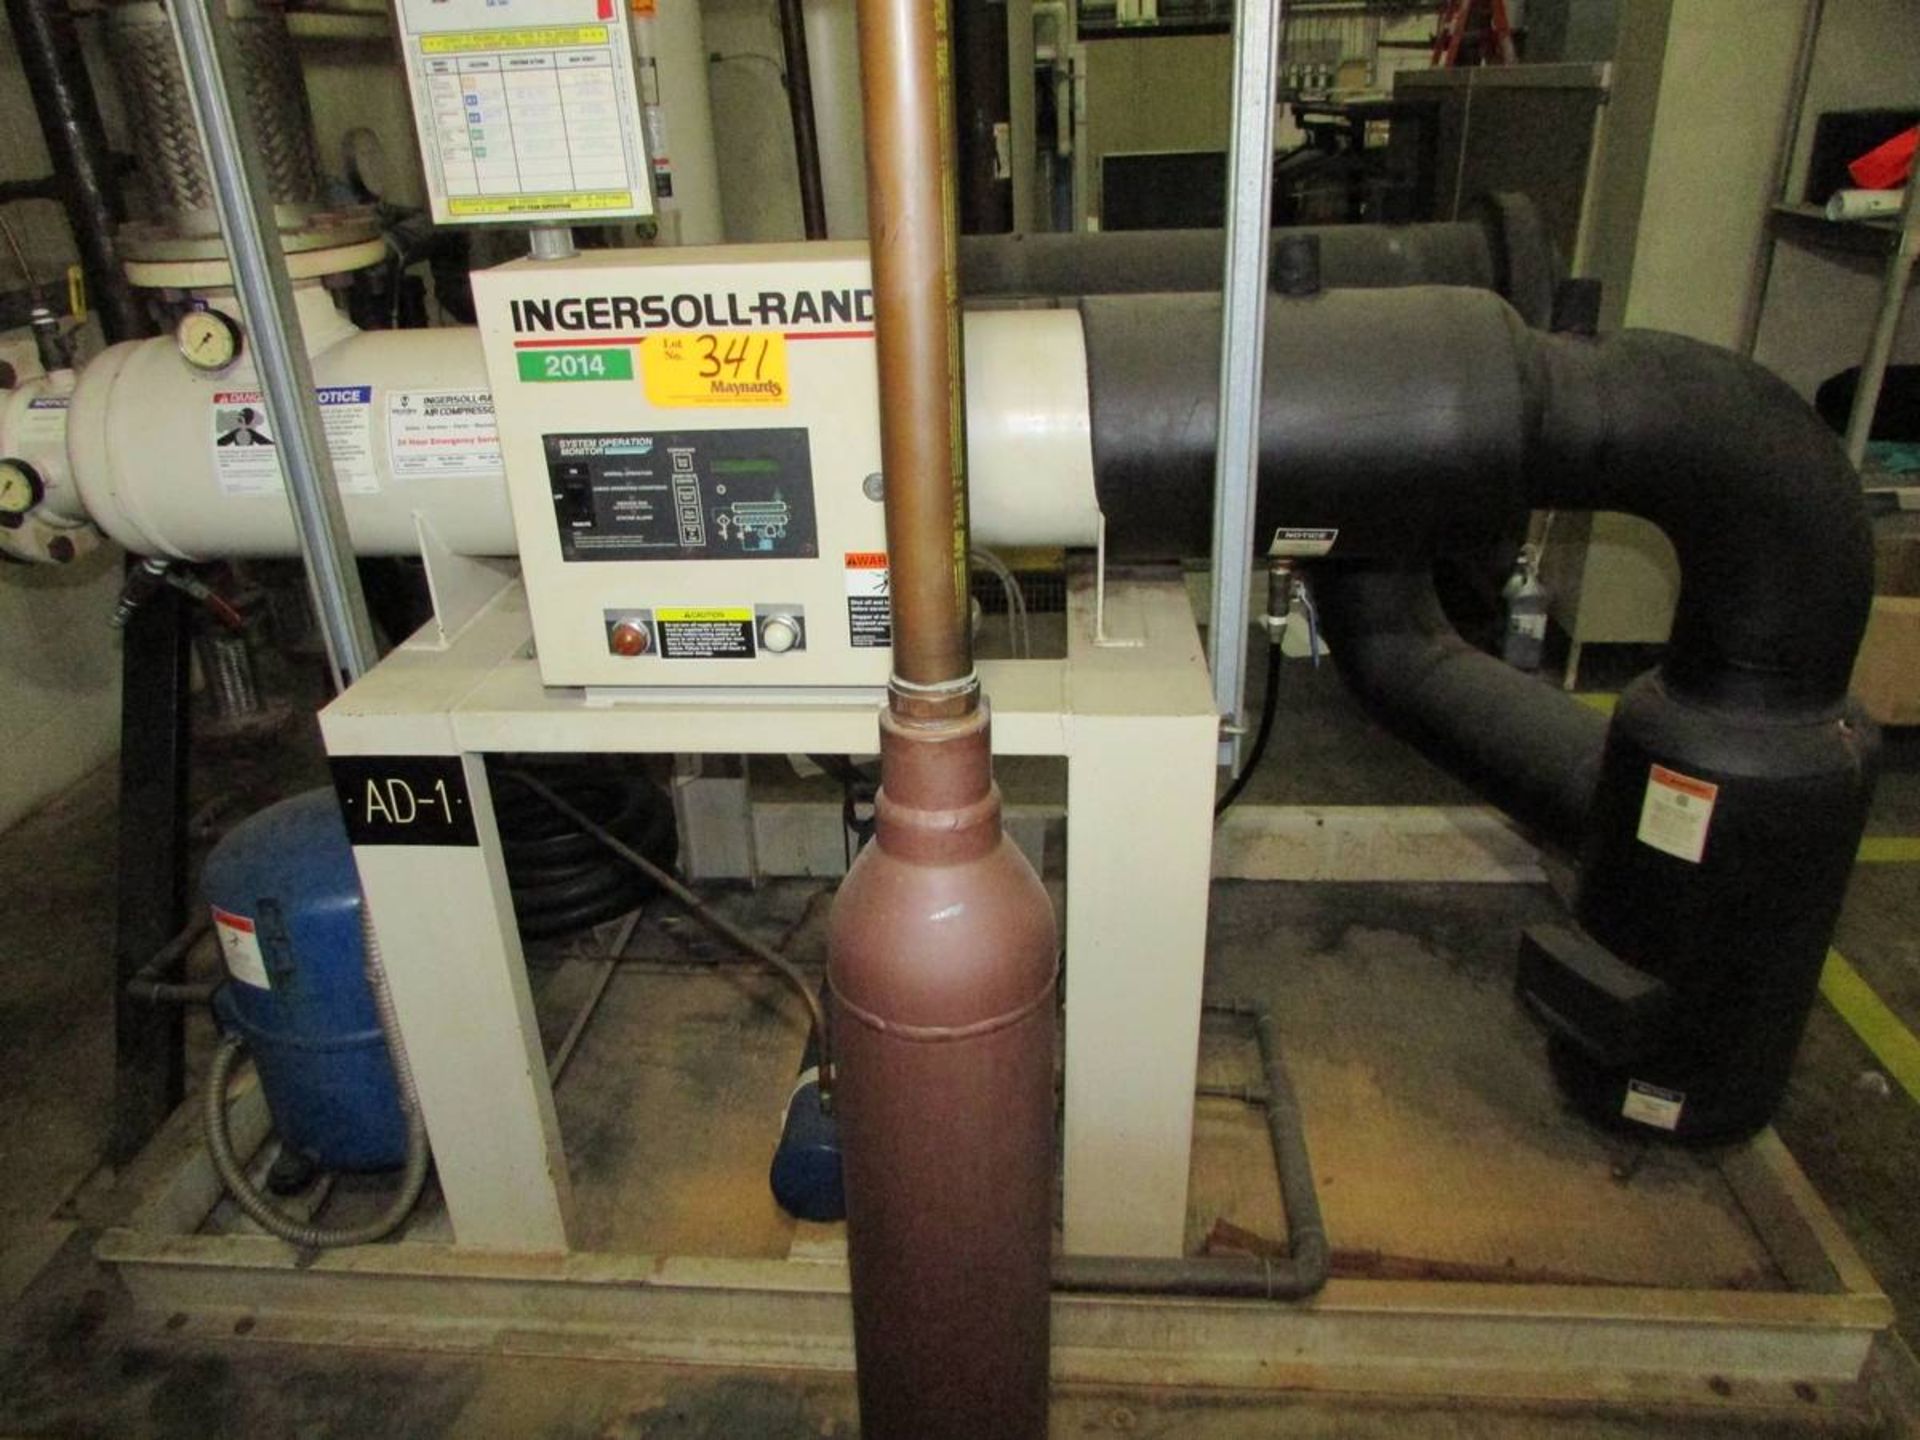 2000 Ingersoll Rand DXR2500W-SP3 Refrigerated Compressed Air Dryer - Image 2 of 10